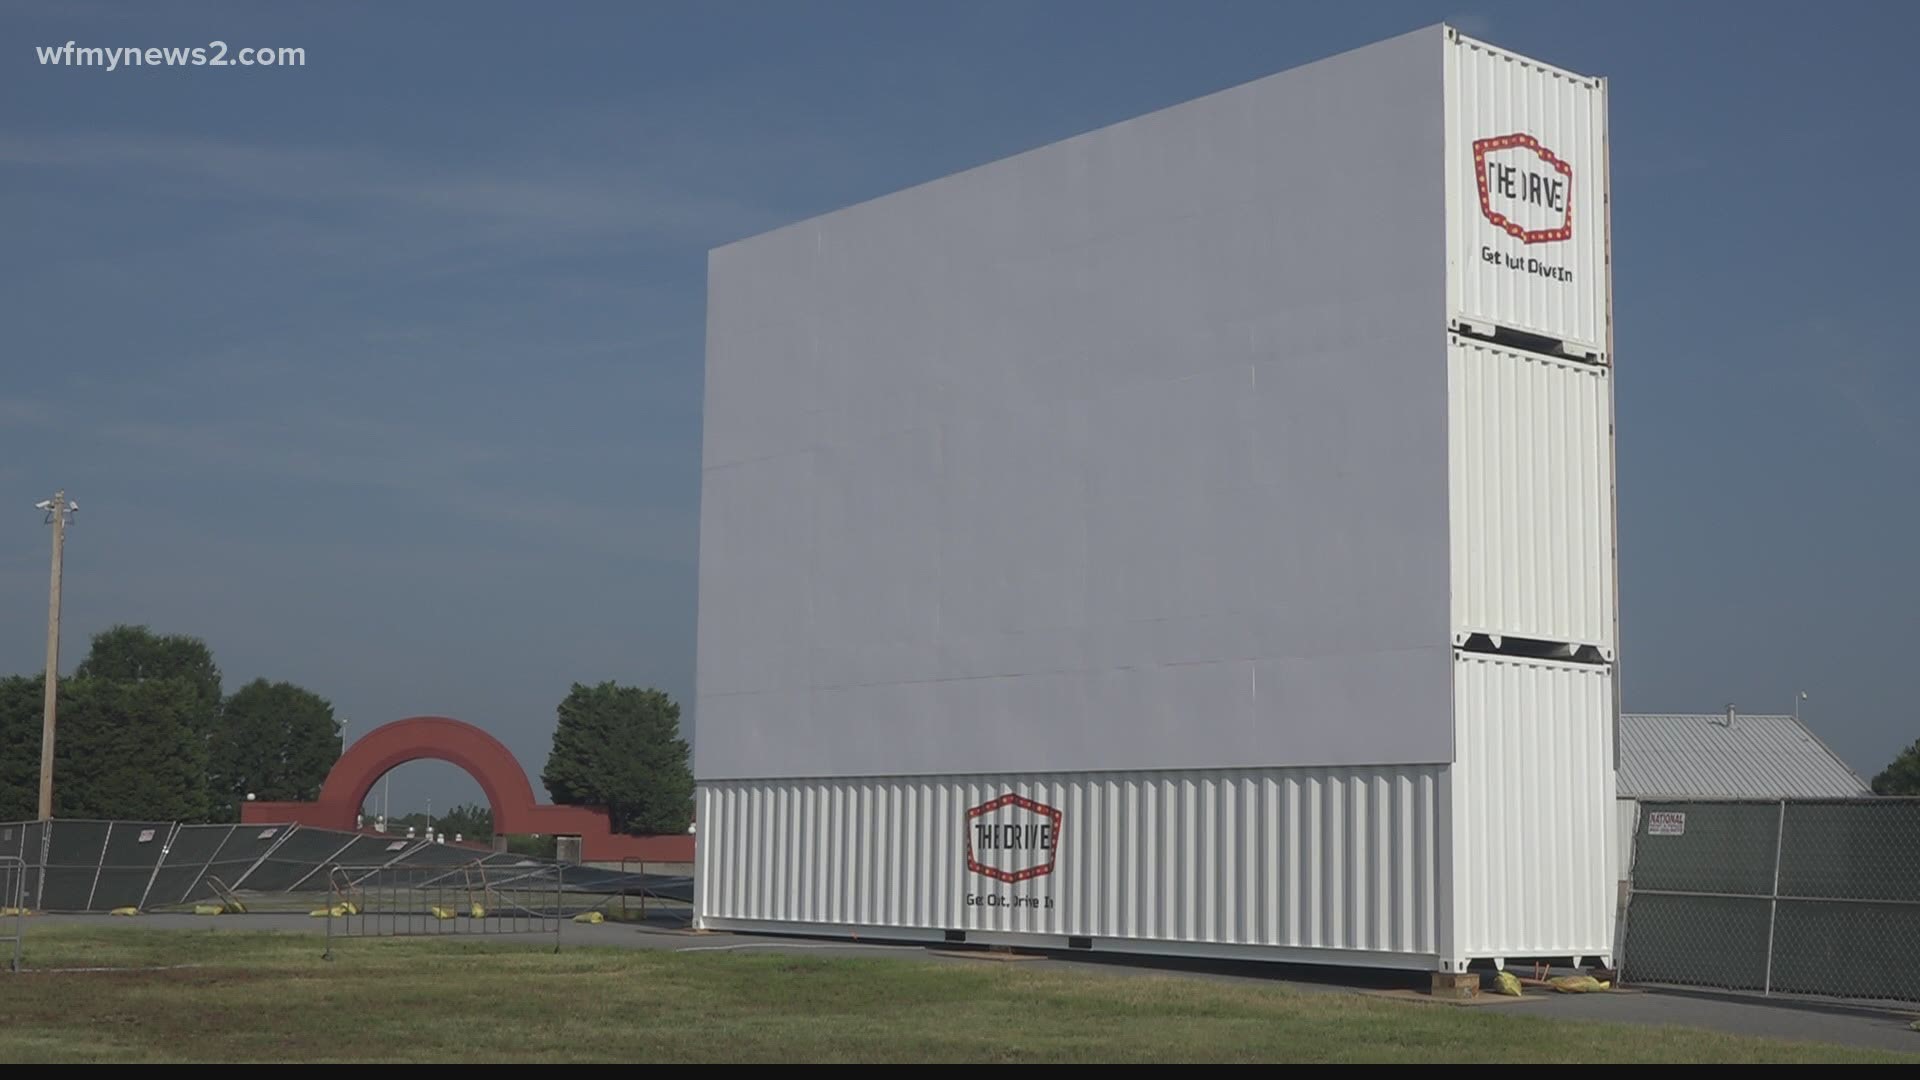 The Drive is a new pop-up drive-in movie theater at the Winston-Salem Fairgrounds.